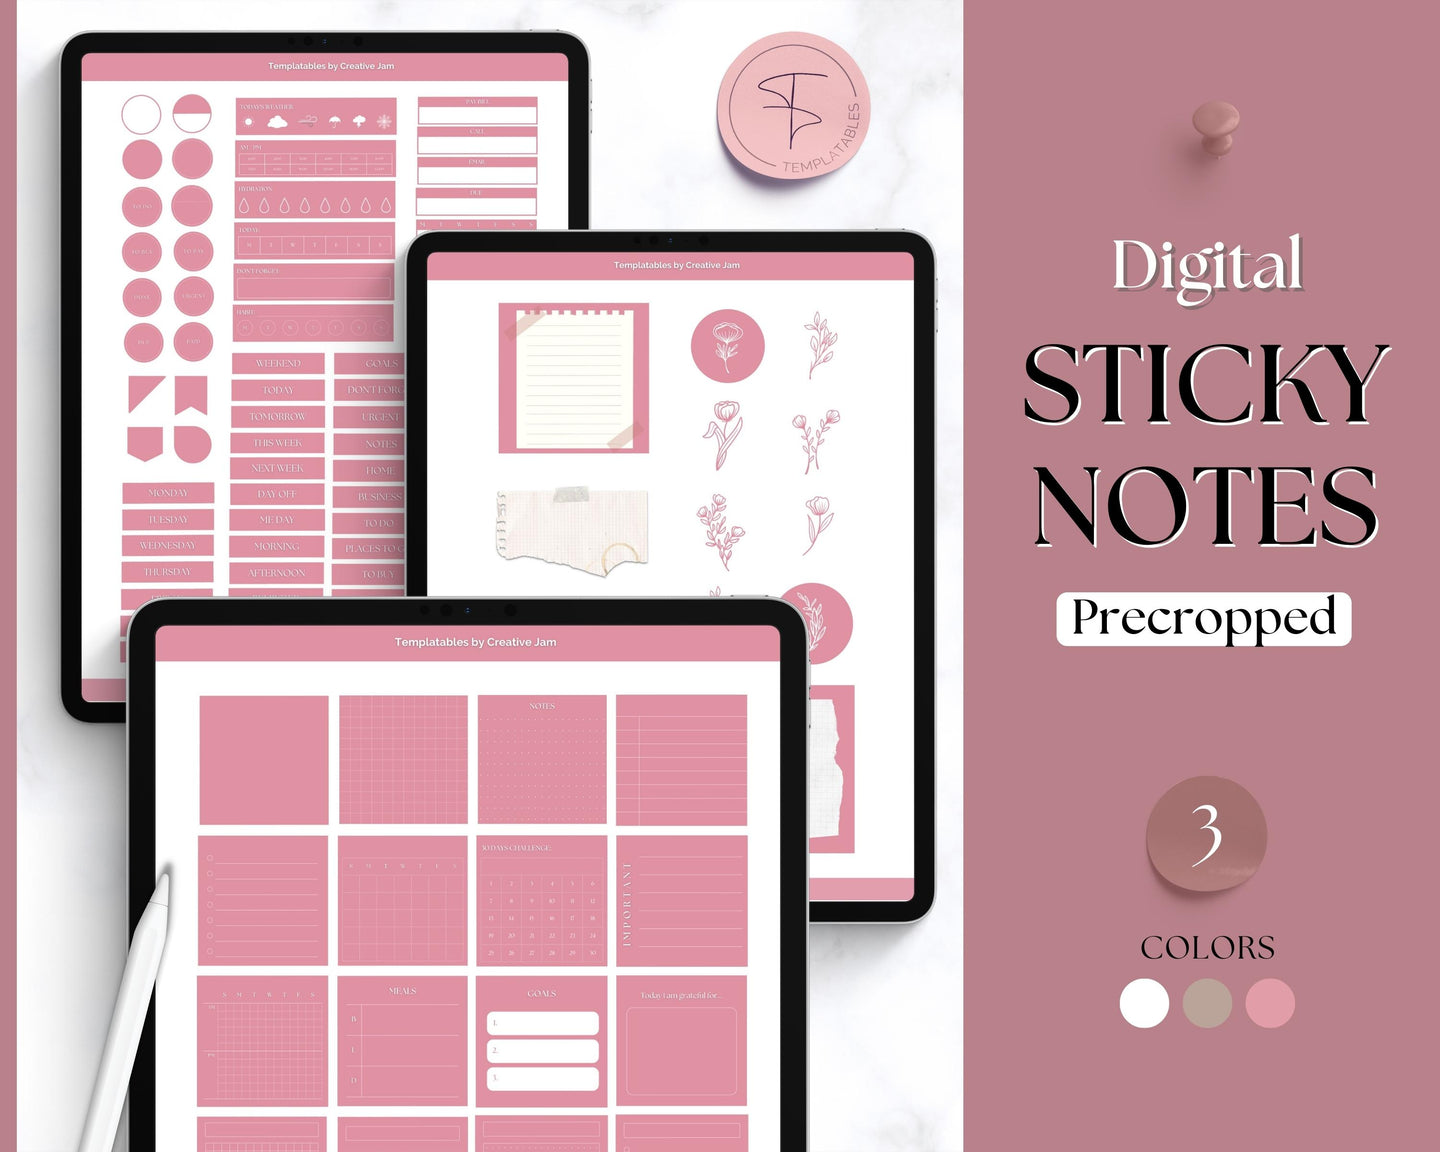 Everyday Digital Stickers Pack Bundle | 300+ Digital Sticky Notes, Post It Notes, Digital Planner Widgets | iPad Precropped GoodNotes PNGs | Bundle 2